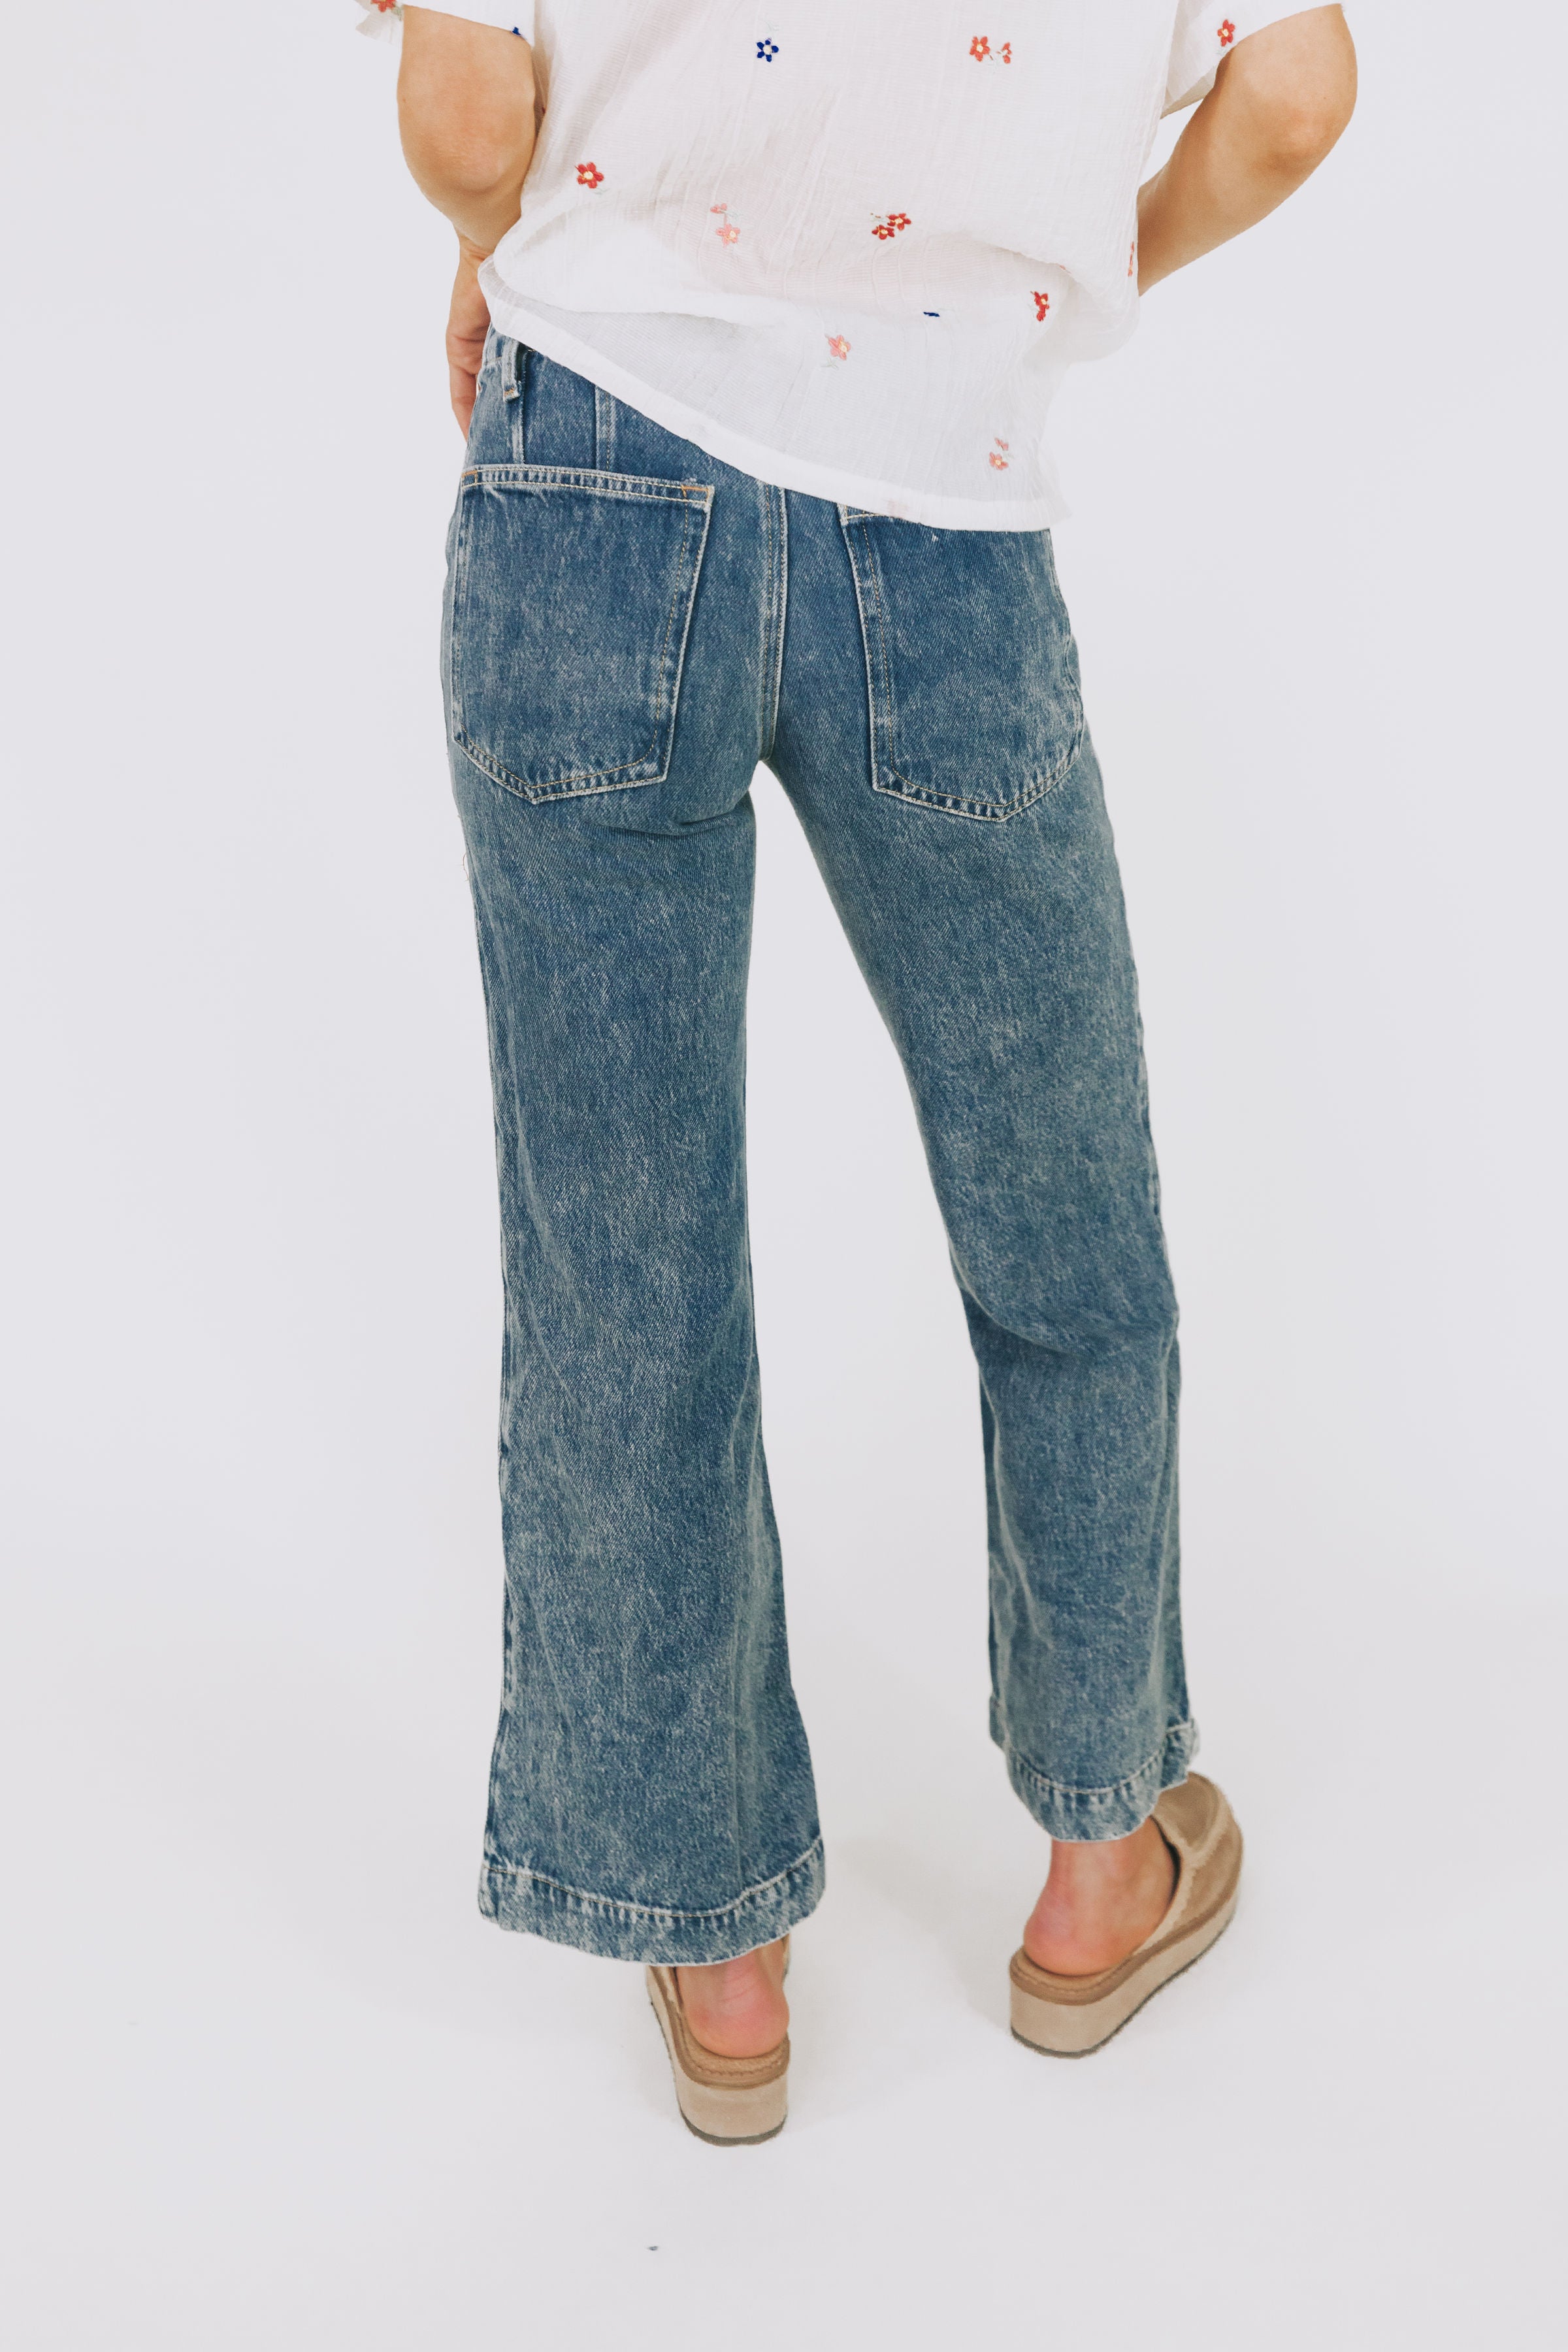 FREE PEOPLE - Golden Valley Mid-Rise Jeans